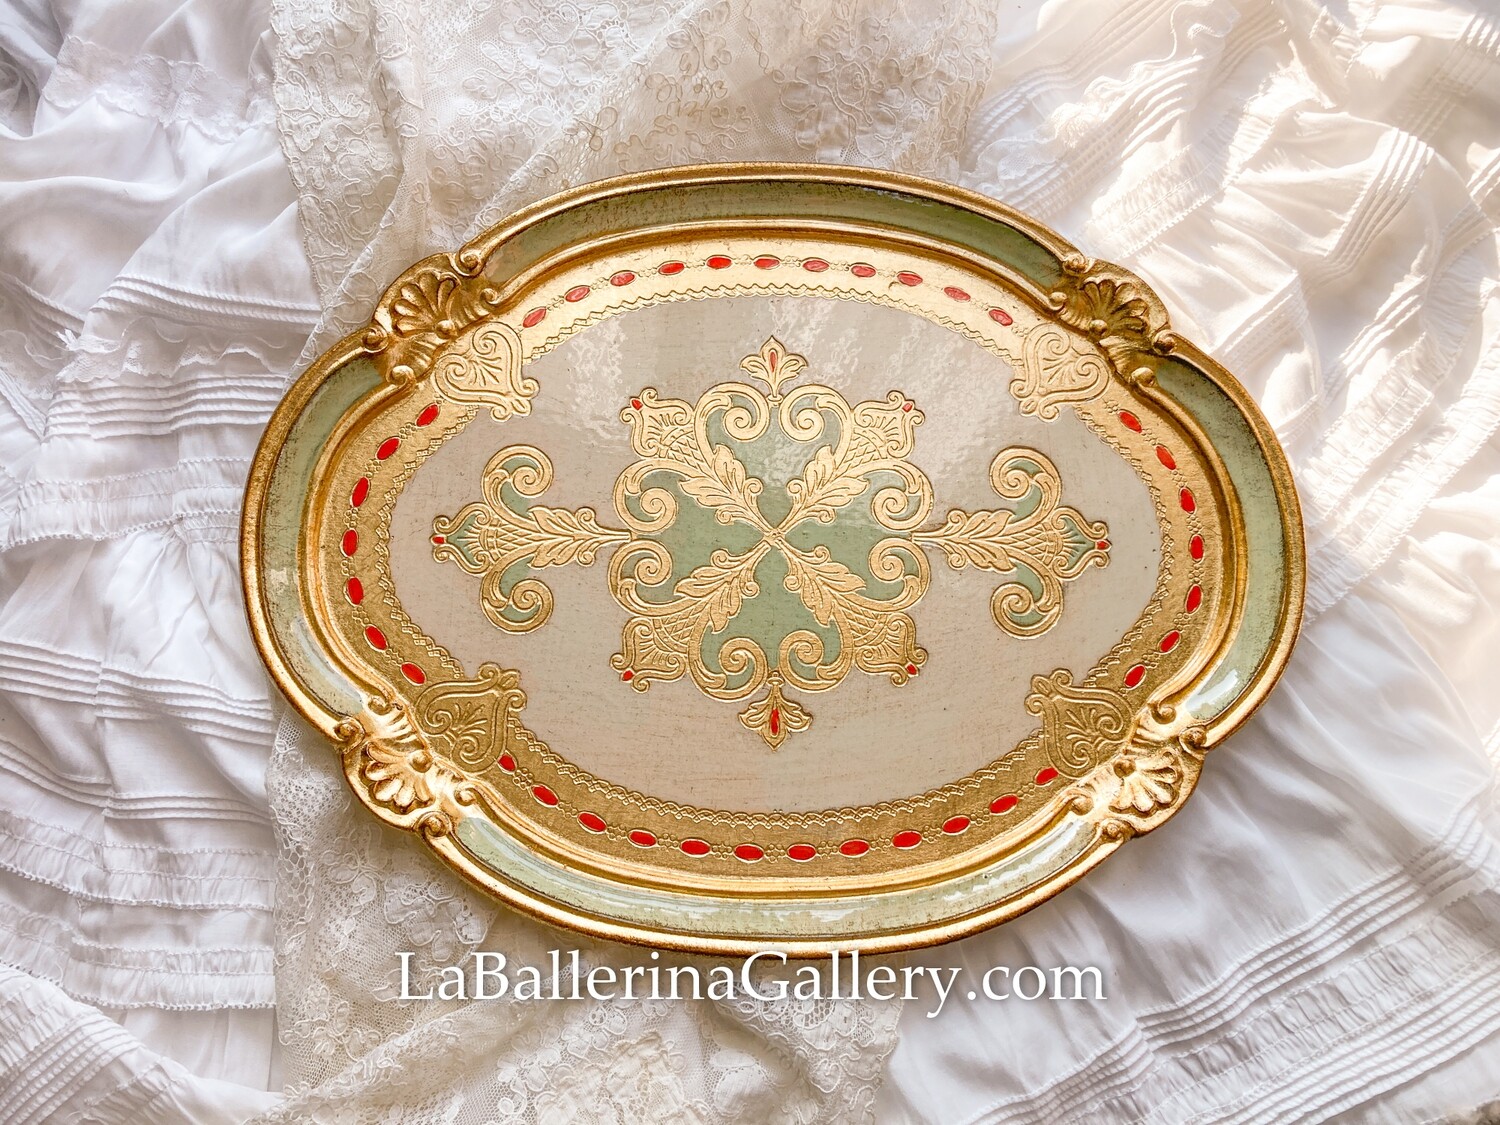 Florentine tray large oval gold white shabby chic baroque rococo wooden decorative tray tea board